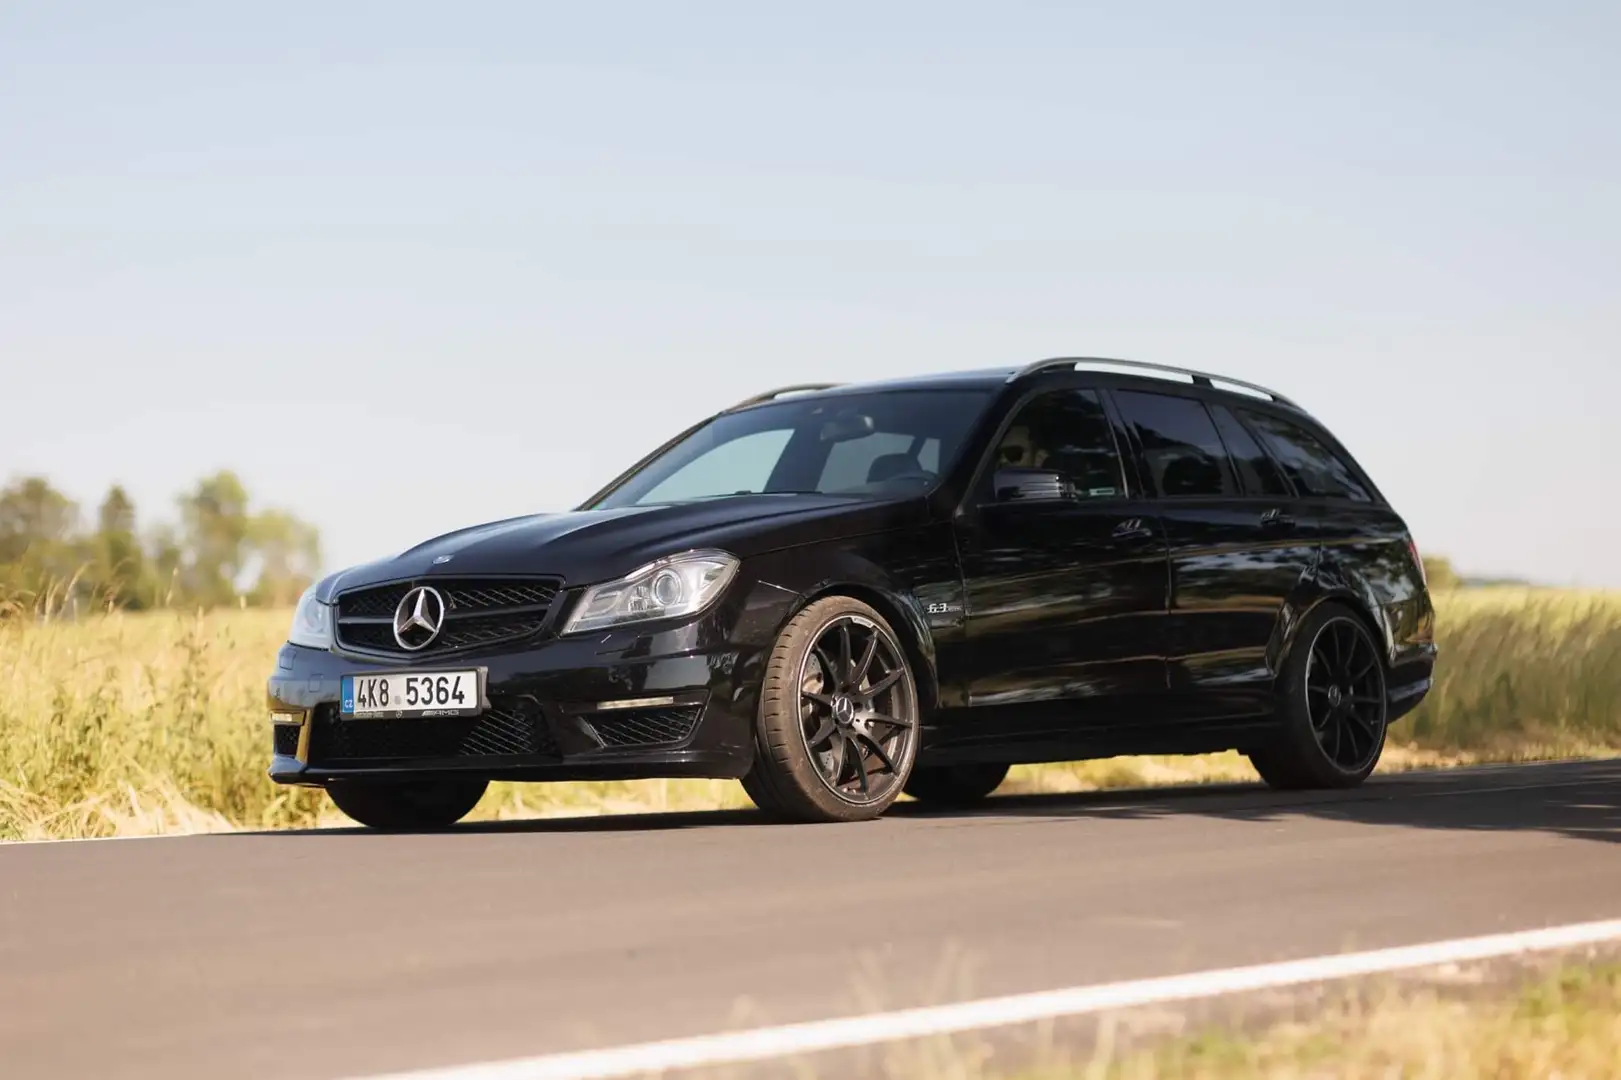 Mercedes-Benz C 63 AMG Amazing sound - long tube headers, PPF wrap, Vmax Negro - 1